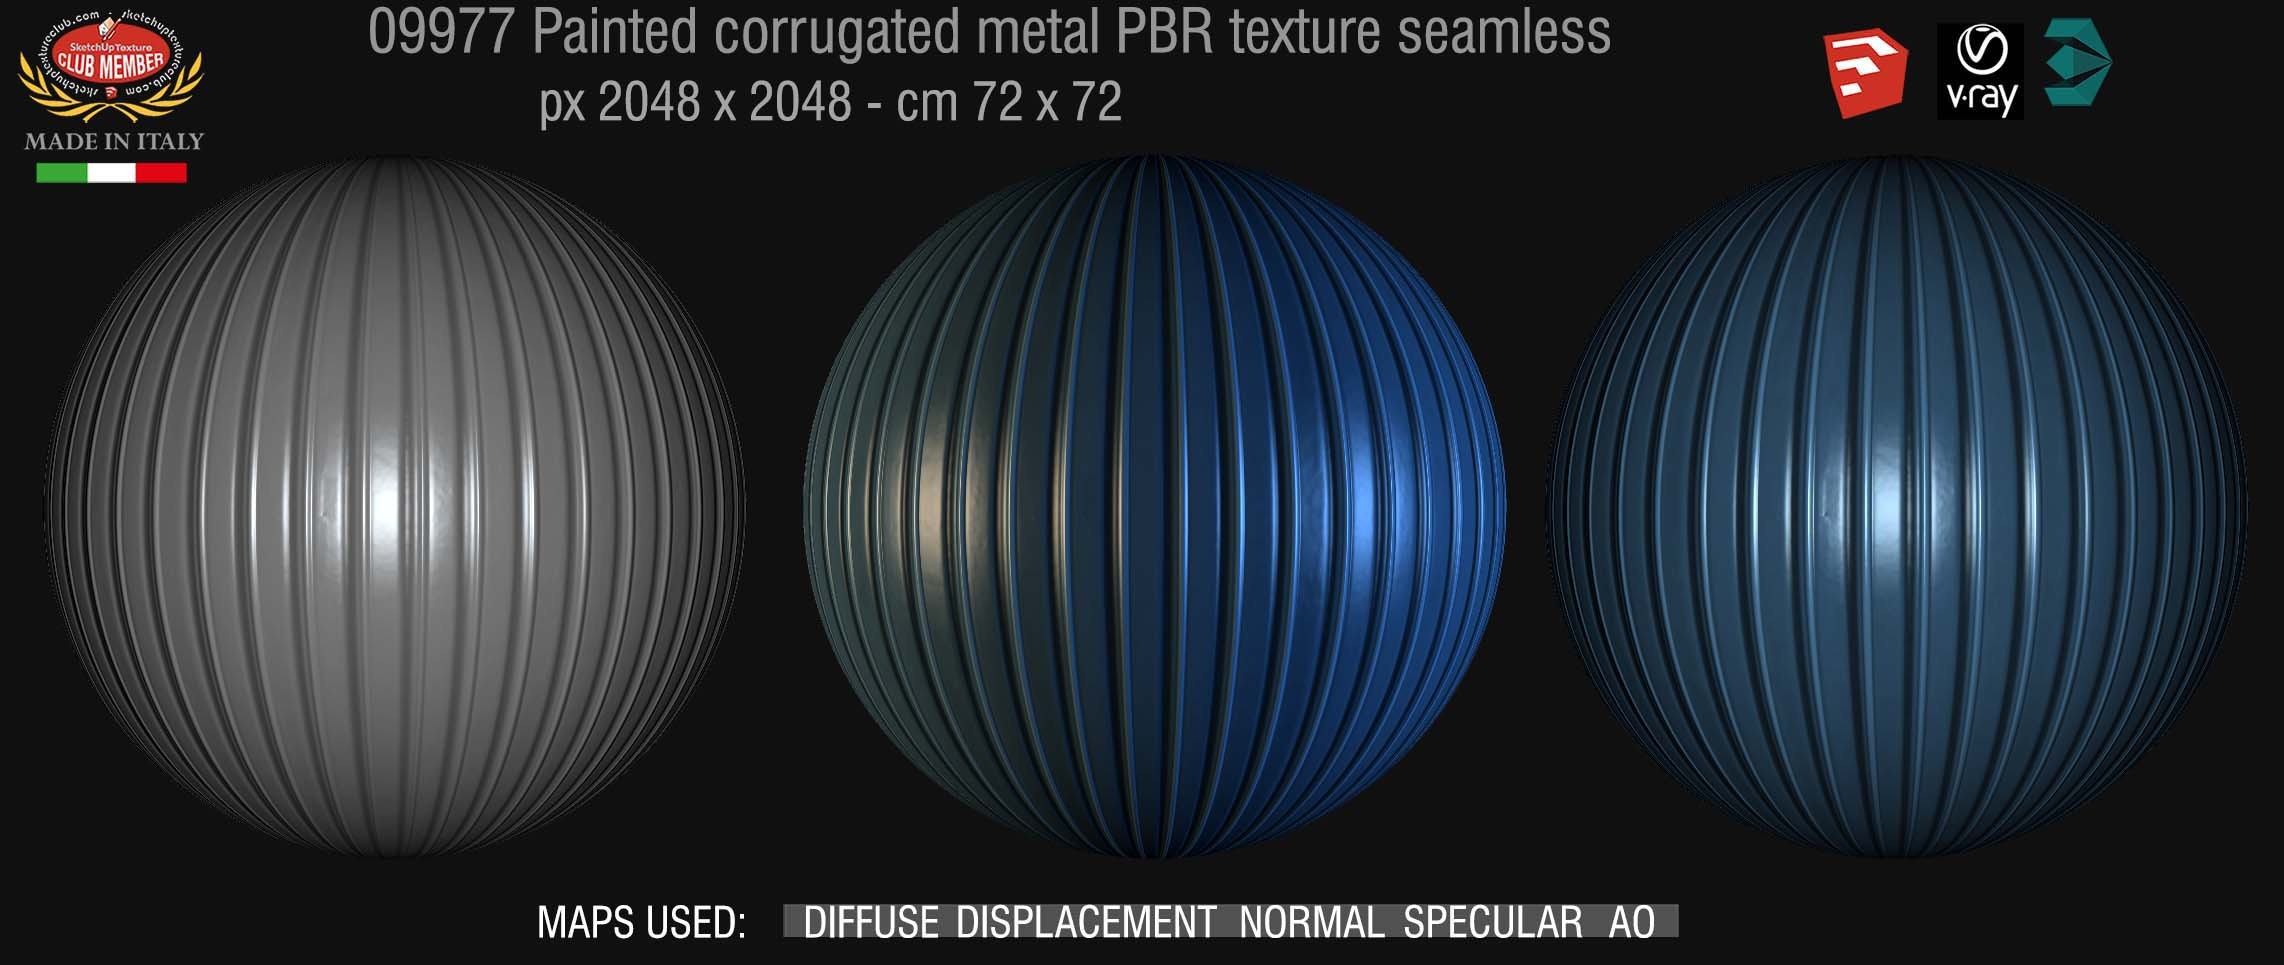 09977 Painted corrugated metal PBR texture seamless DEMO